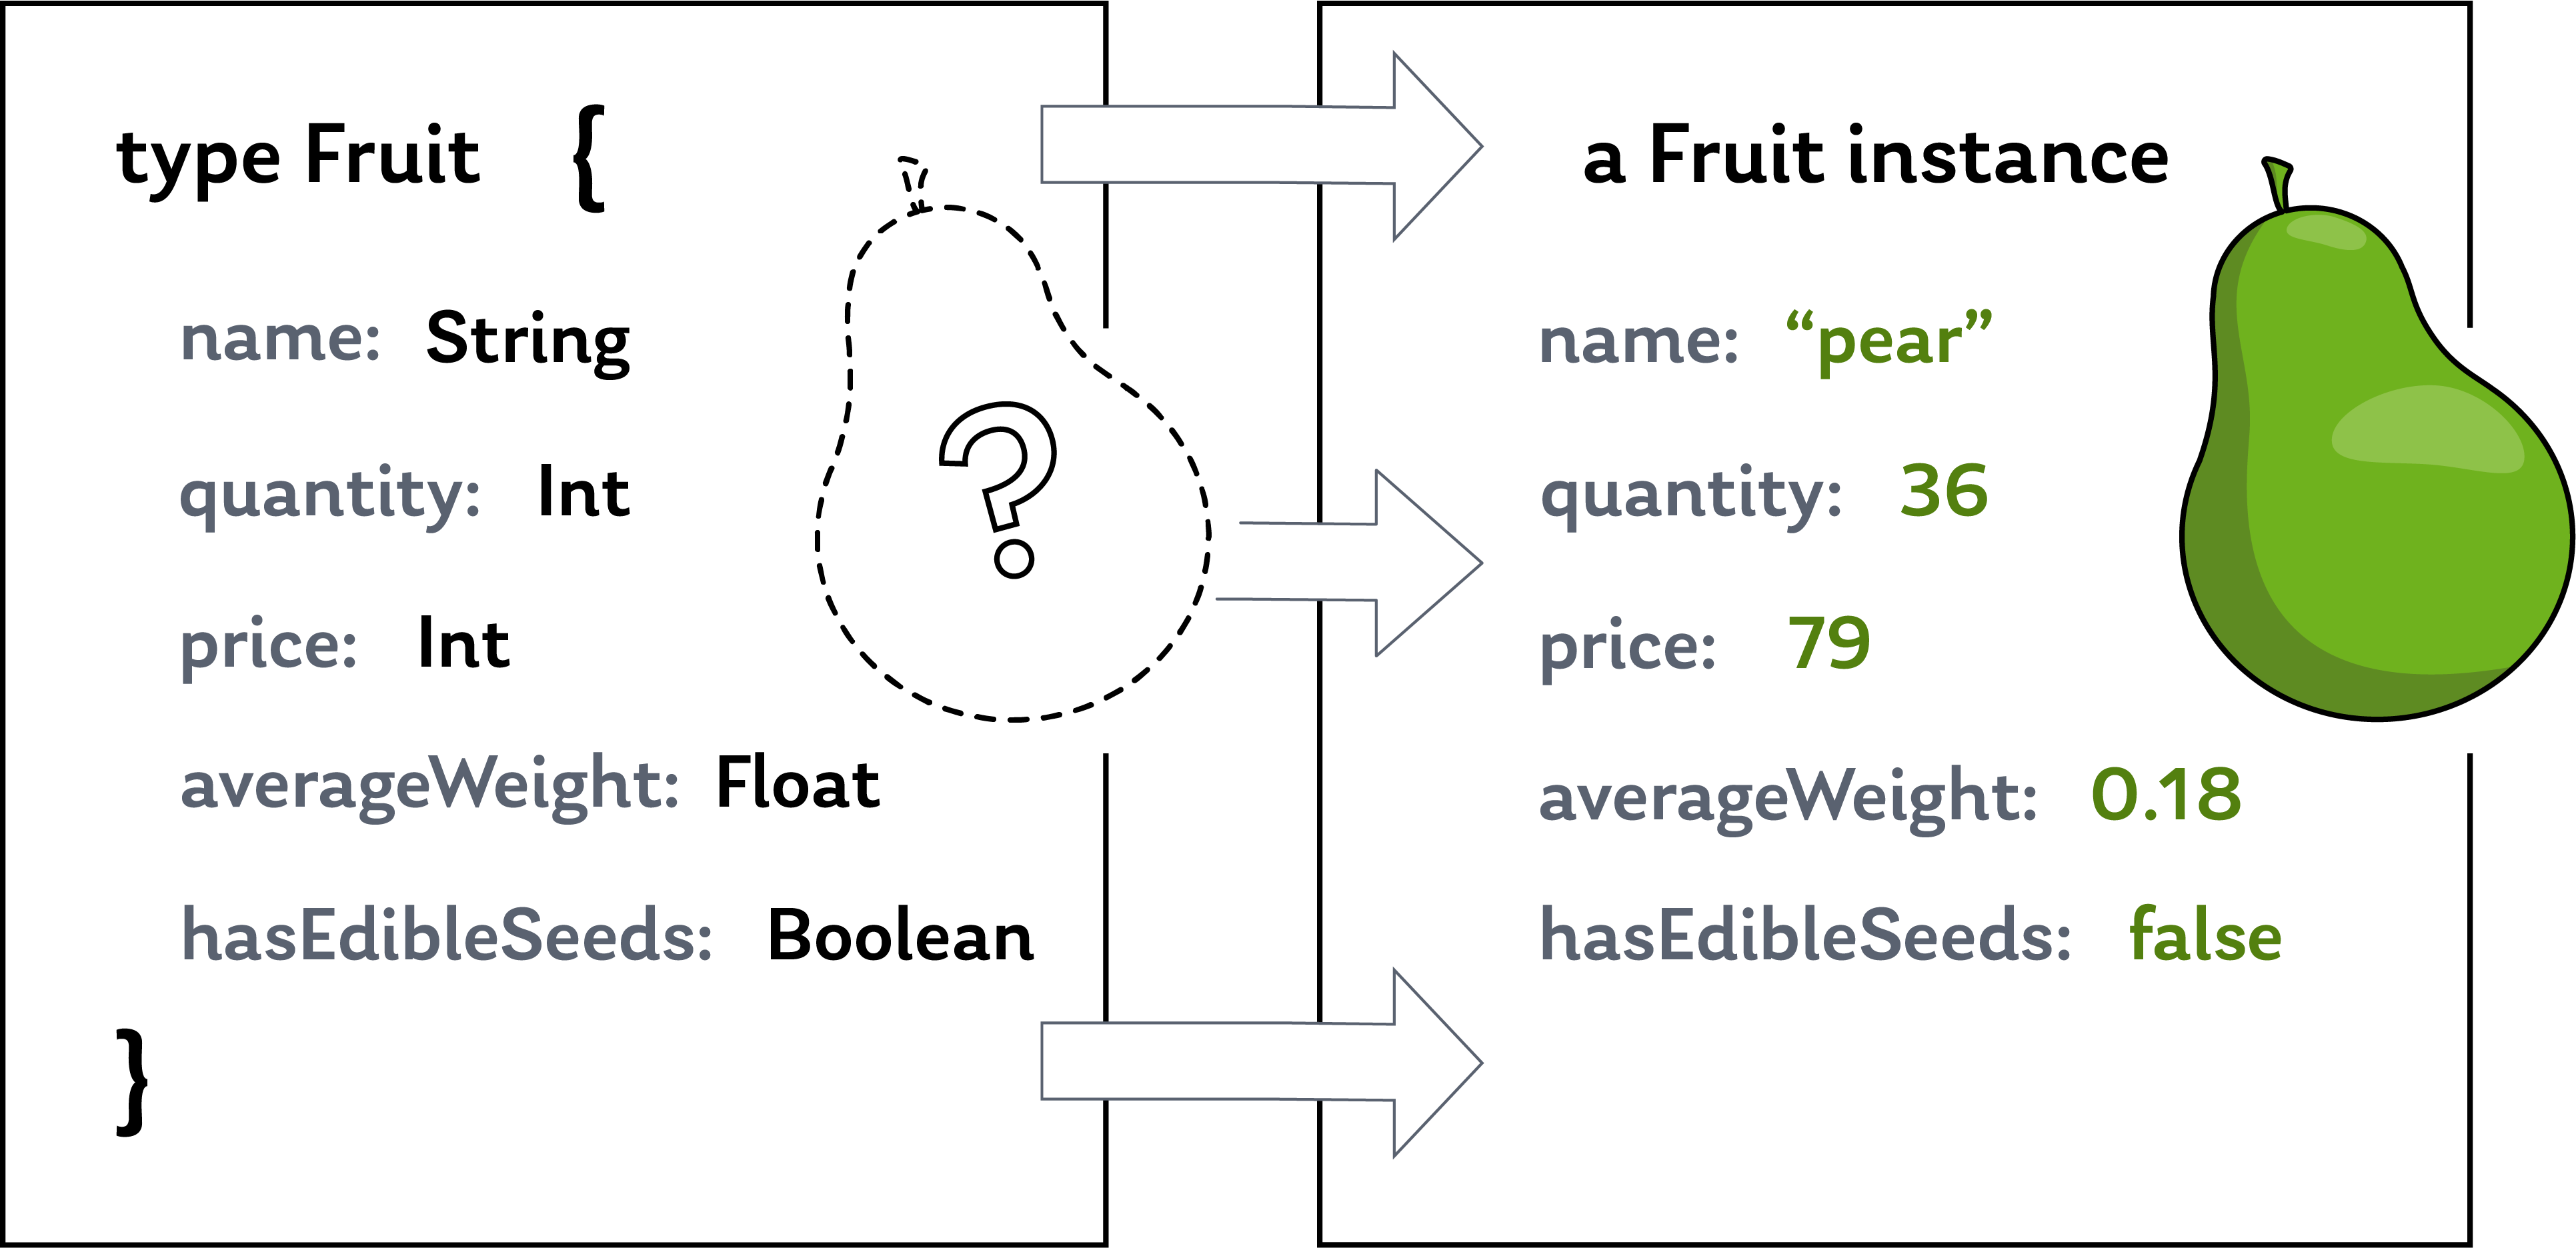 The Fruit type definition compared to an instance of that type.